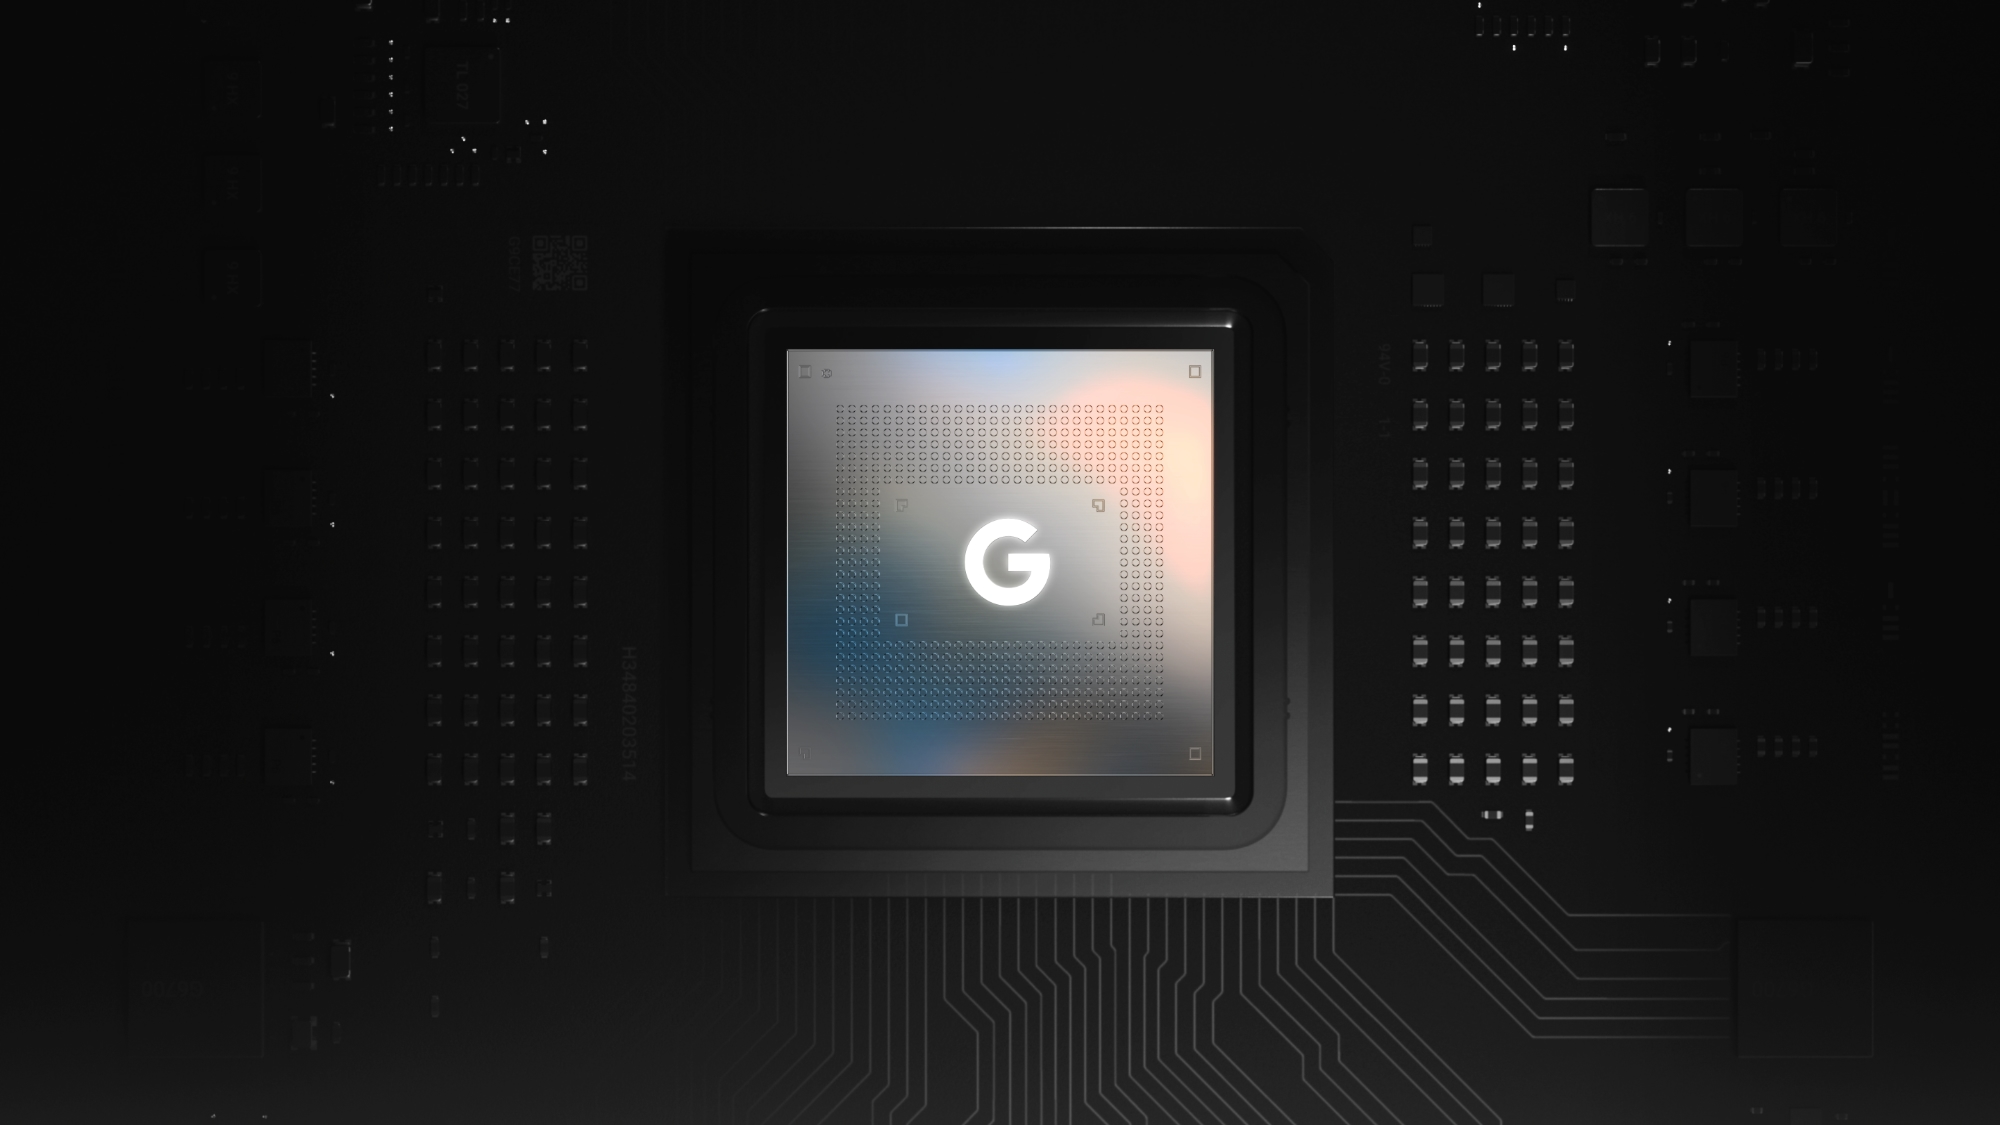 Nine cores, improved performance and new graphics: insider shares details of Tensor G3 chip for Pixel 8 and Pixel 8 Pro